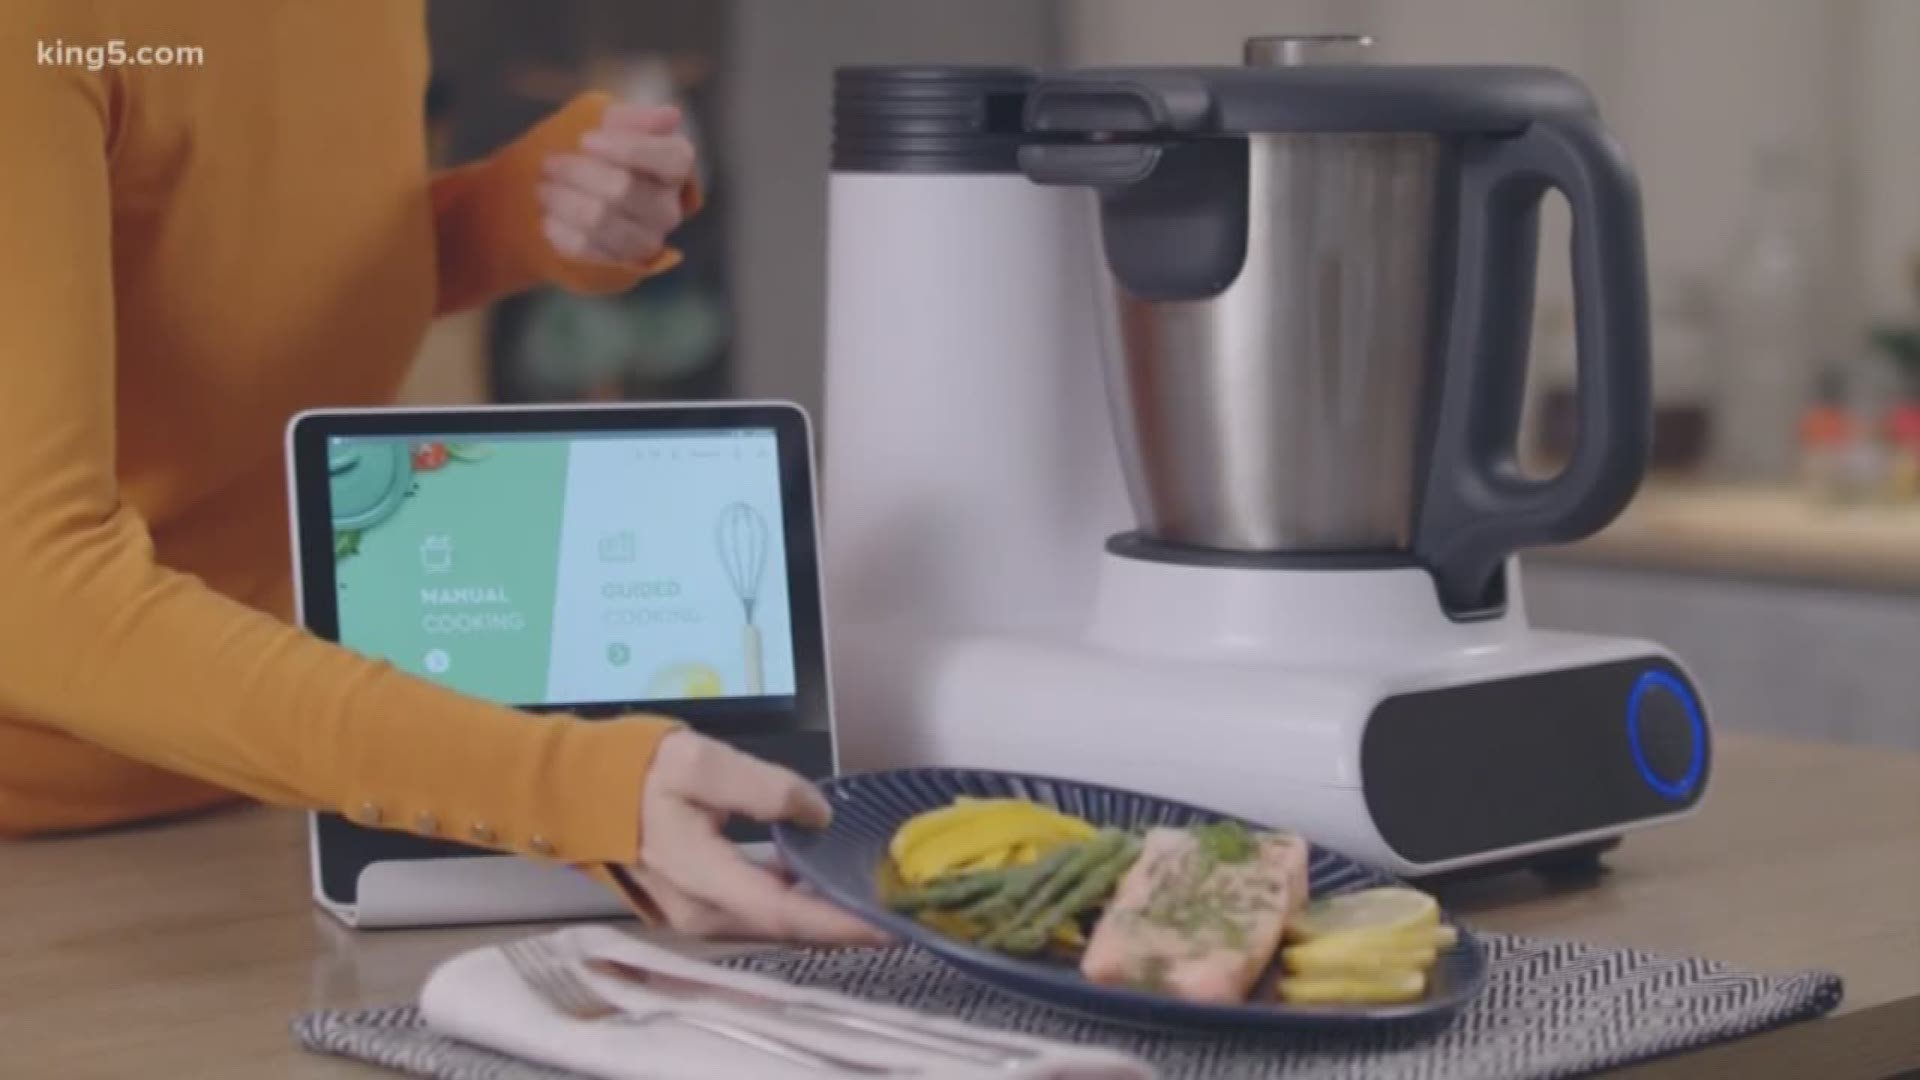 You've heard of self-driving cars, but what about an autonomous kitchen? Julia is a smart kitchen appliance that does it all.